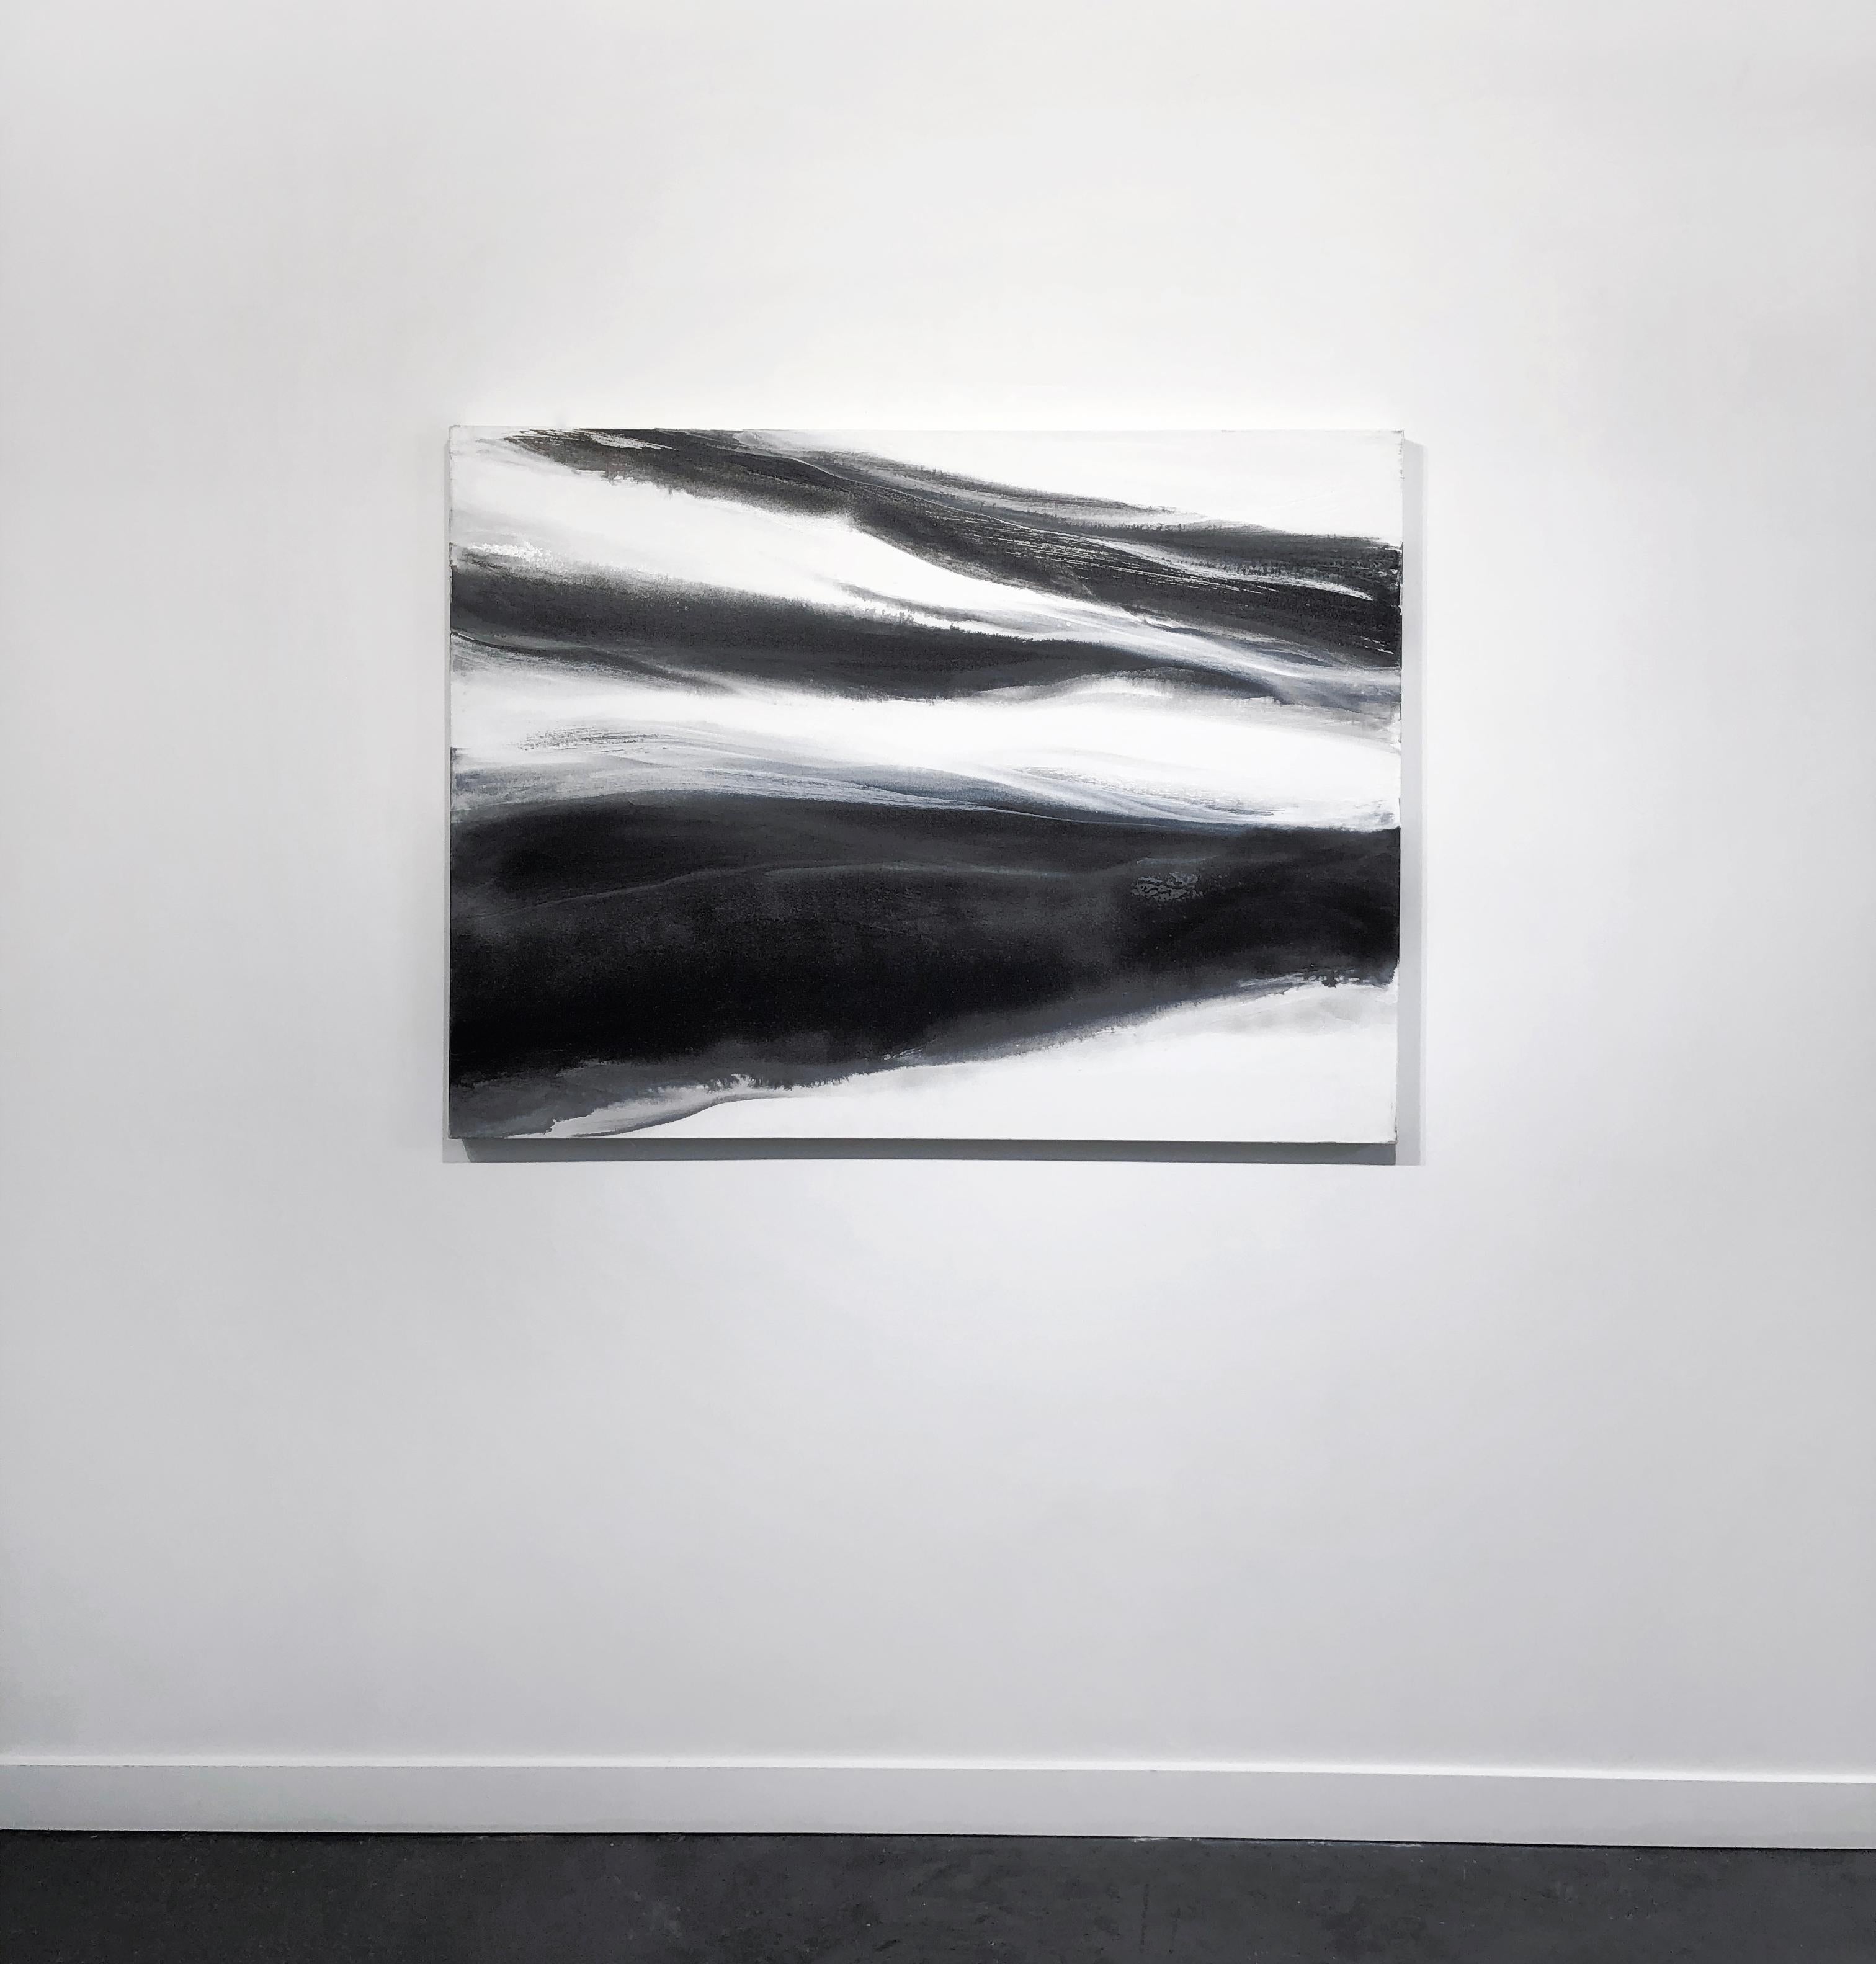 Black & white with silver metallic. Gallery-wrapped canvas sides painted silver. Ready to hang; No framing necessary.  Hangs vertical or horizontal wired on back by artist.

ARTIST BIO
Teodora Guererra received her Bachelor of Arts in Art Education